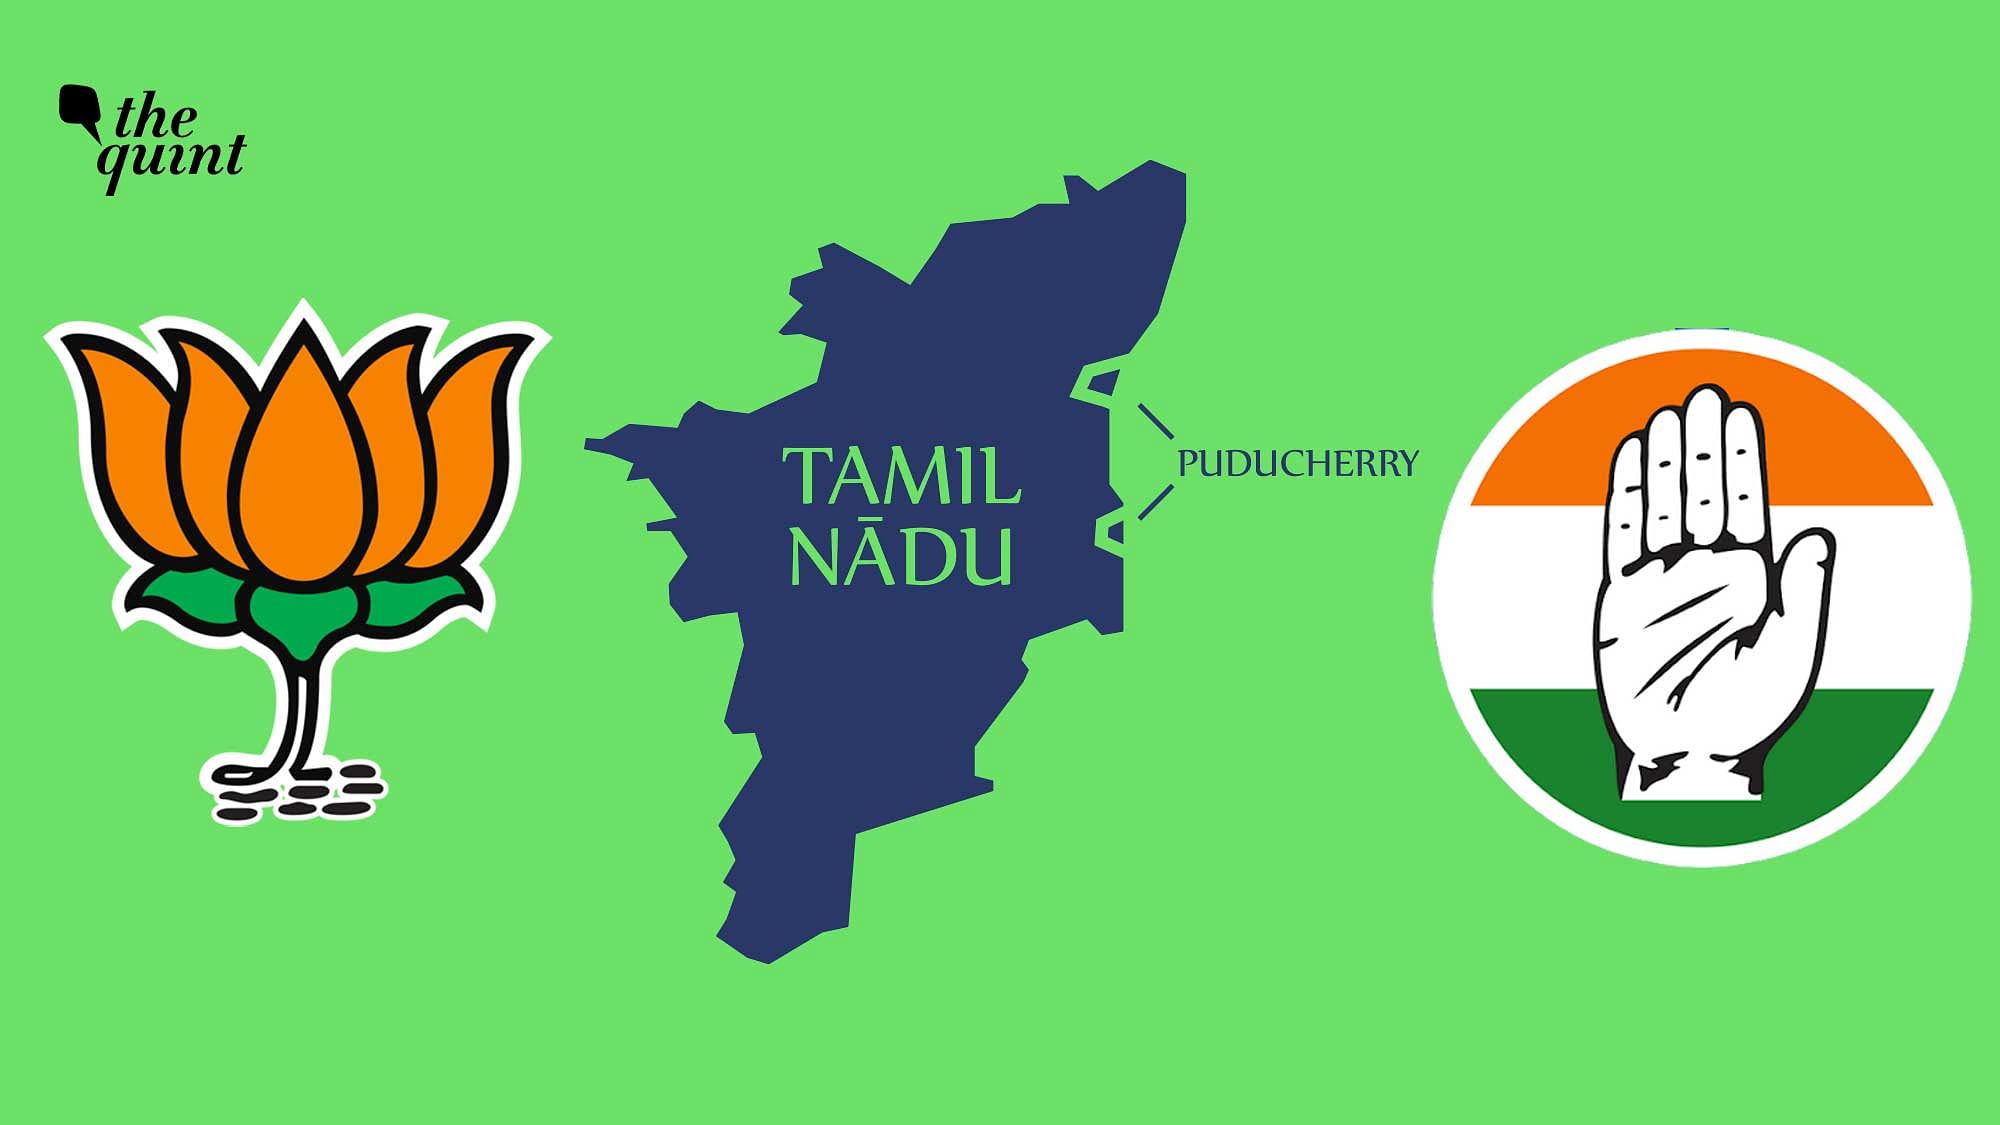 Image of Puducherry’s location on the map, and BJP &amp; Congress’s symbols, used for representational purposes.